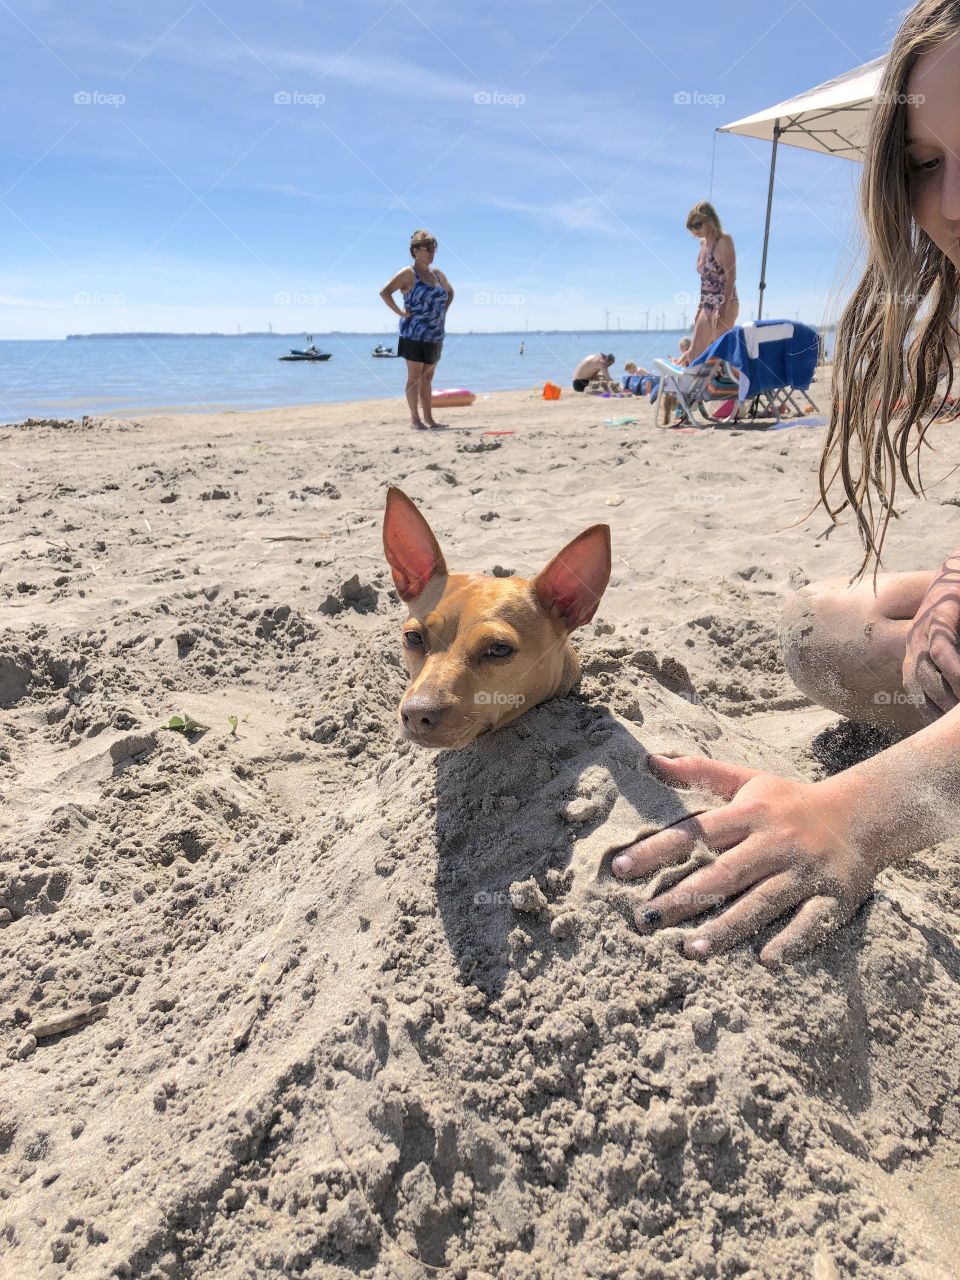 Dog buried in the sand to stay cool 